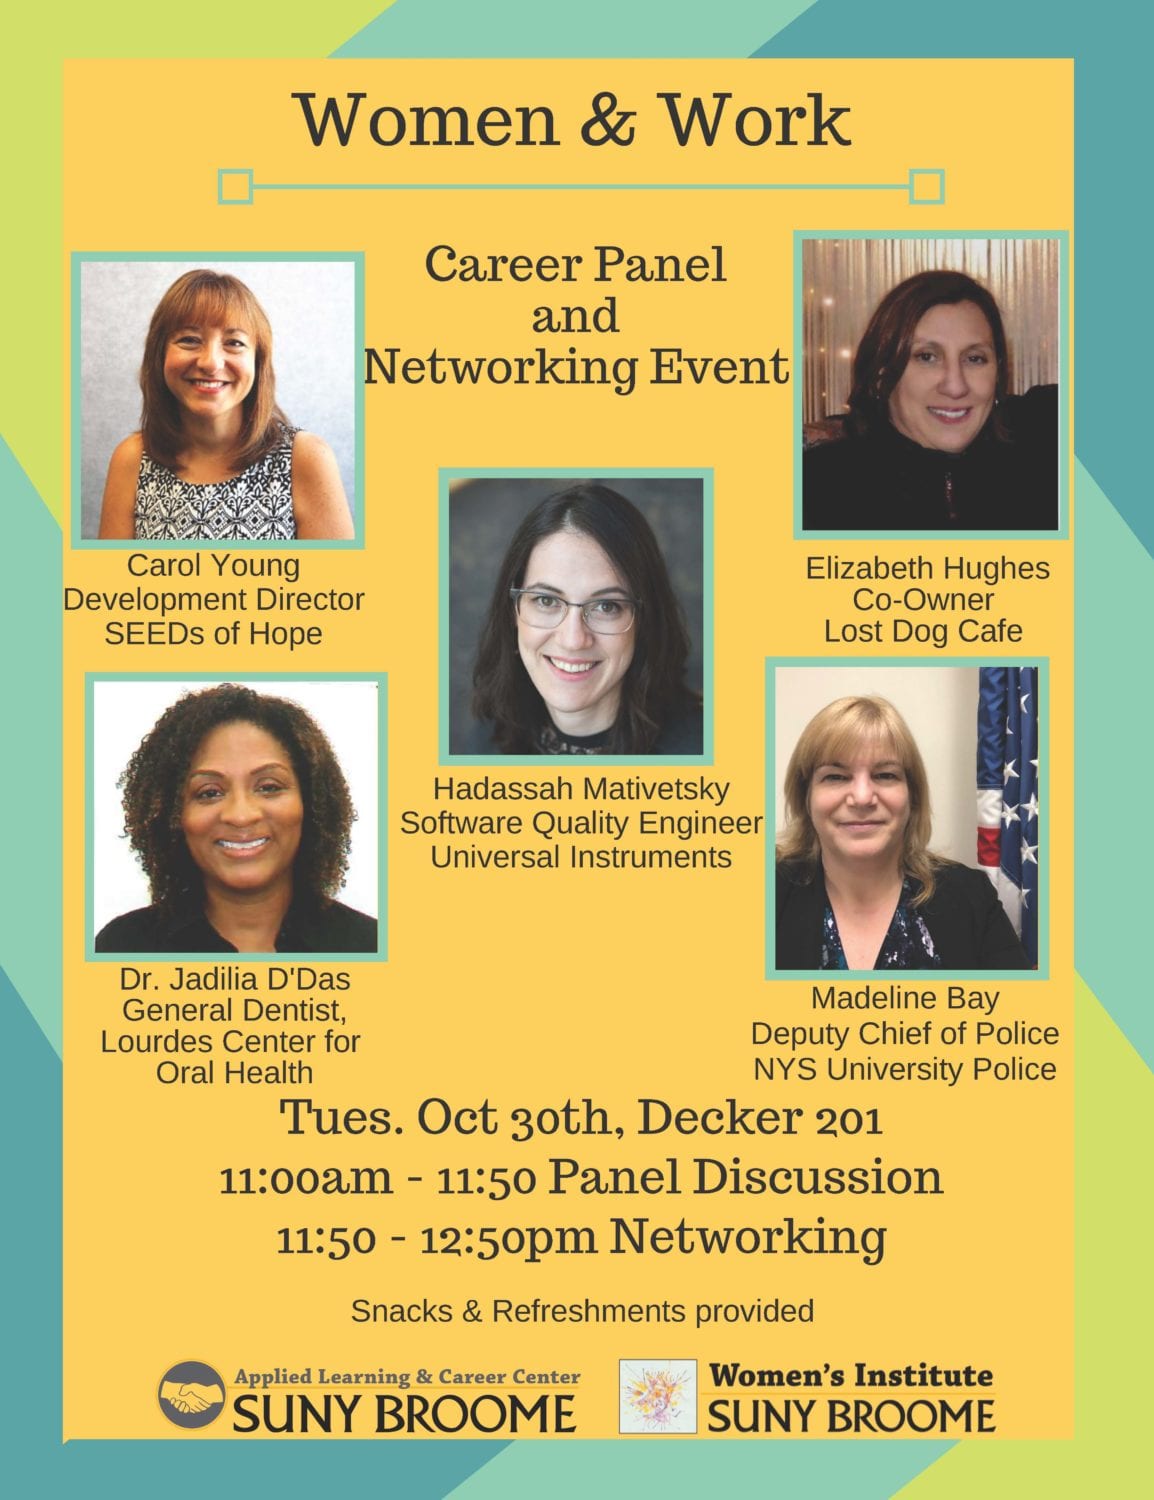 Women and Work Career Panel & Networking Event on Oct. 30